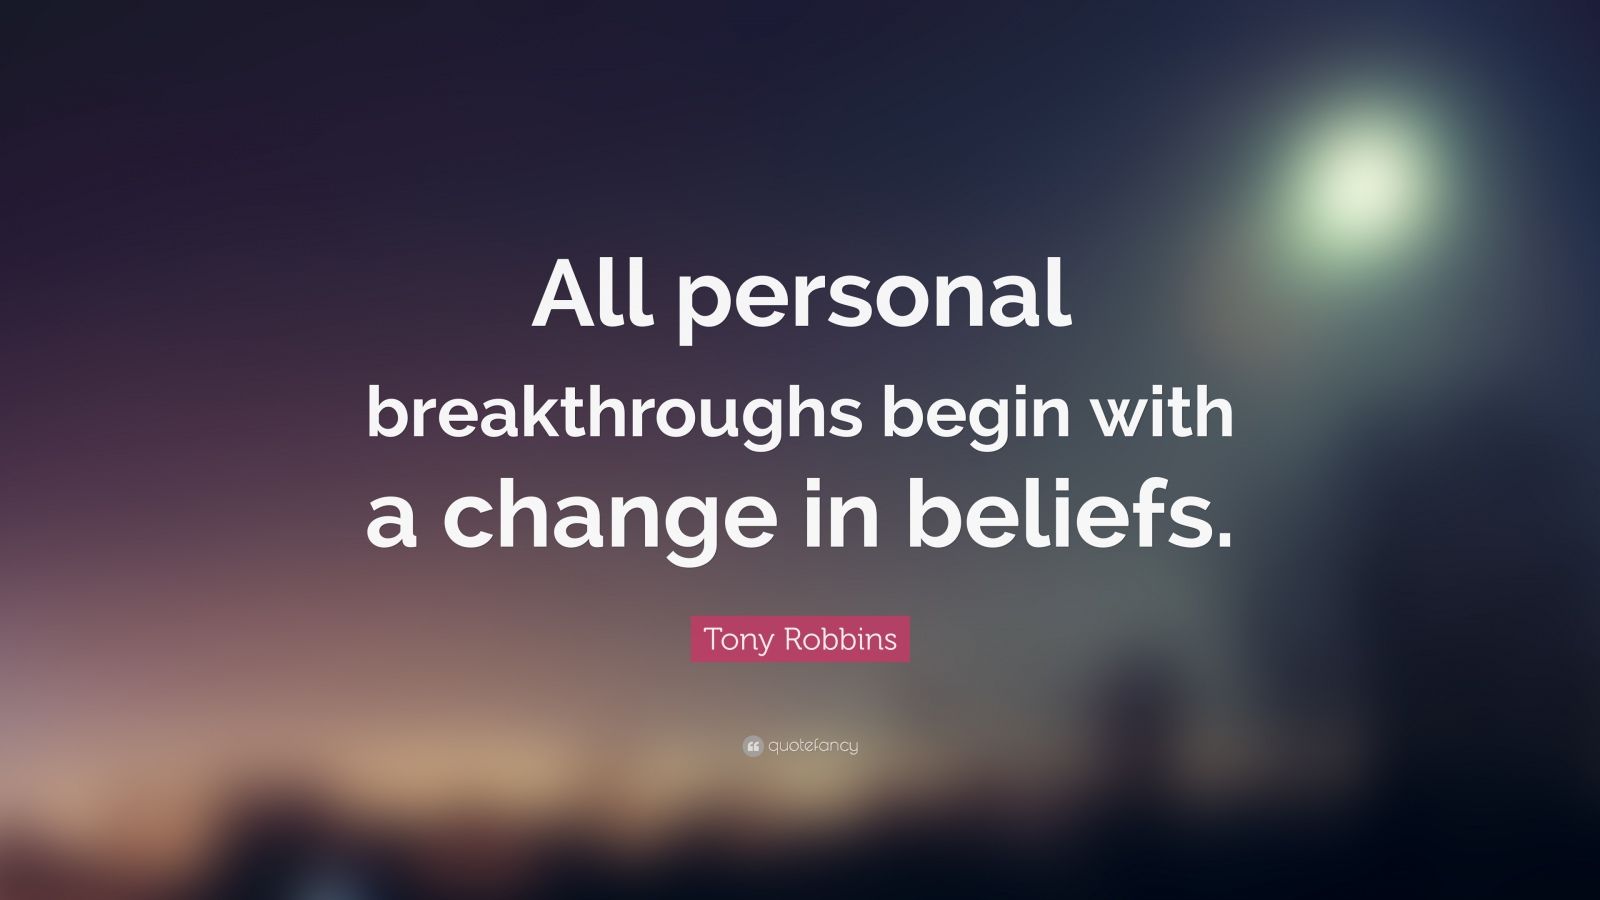 Tony Robbins Quote: “All personal breakthroughs begin with a change in ...